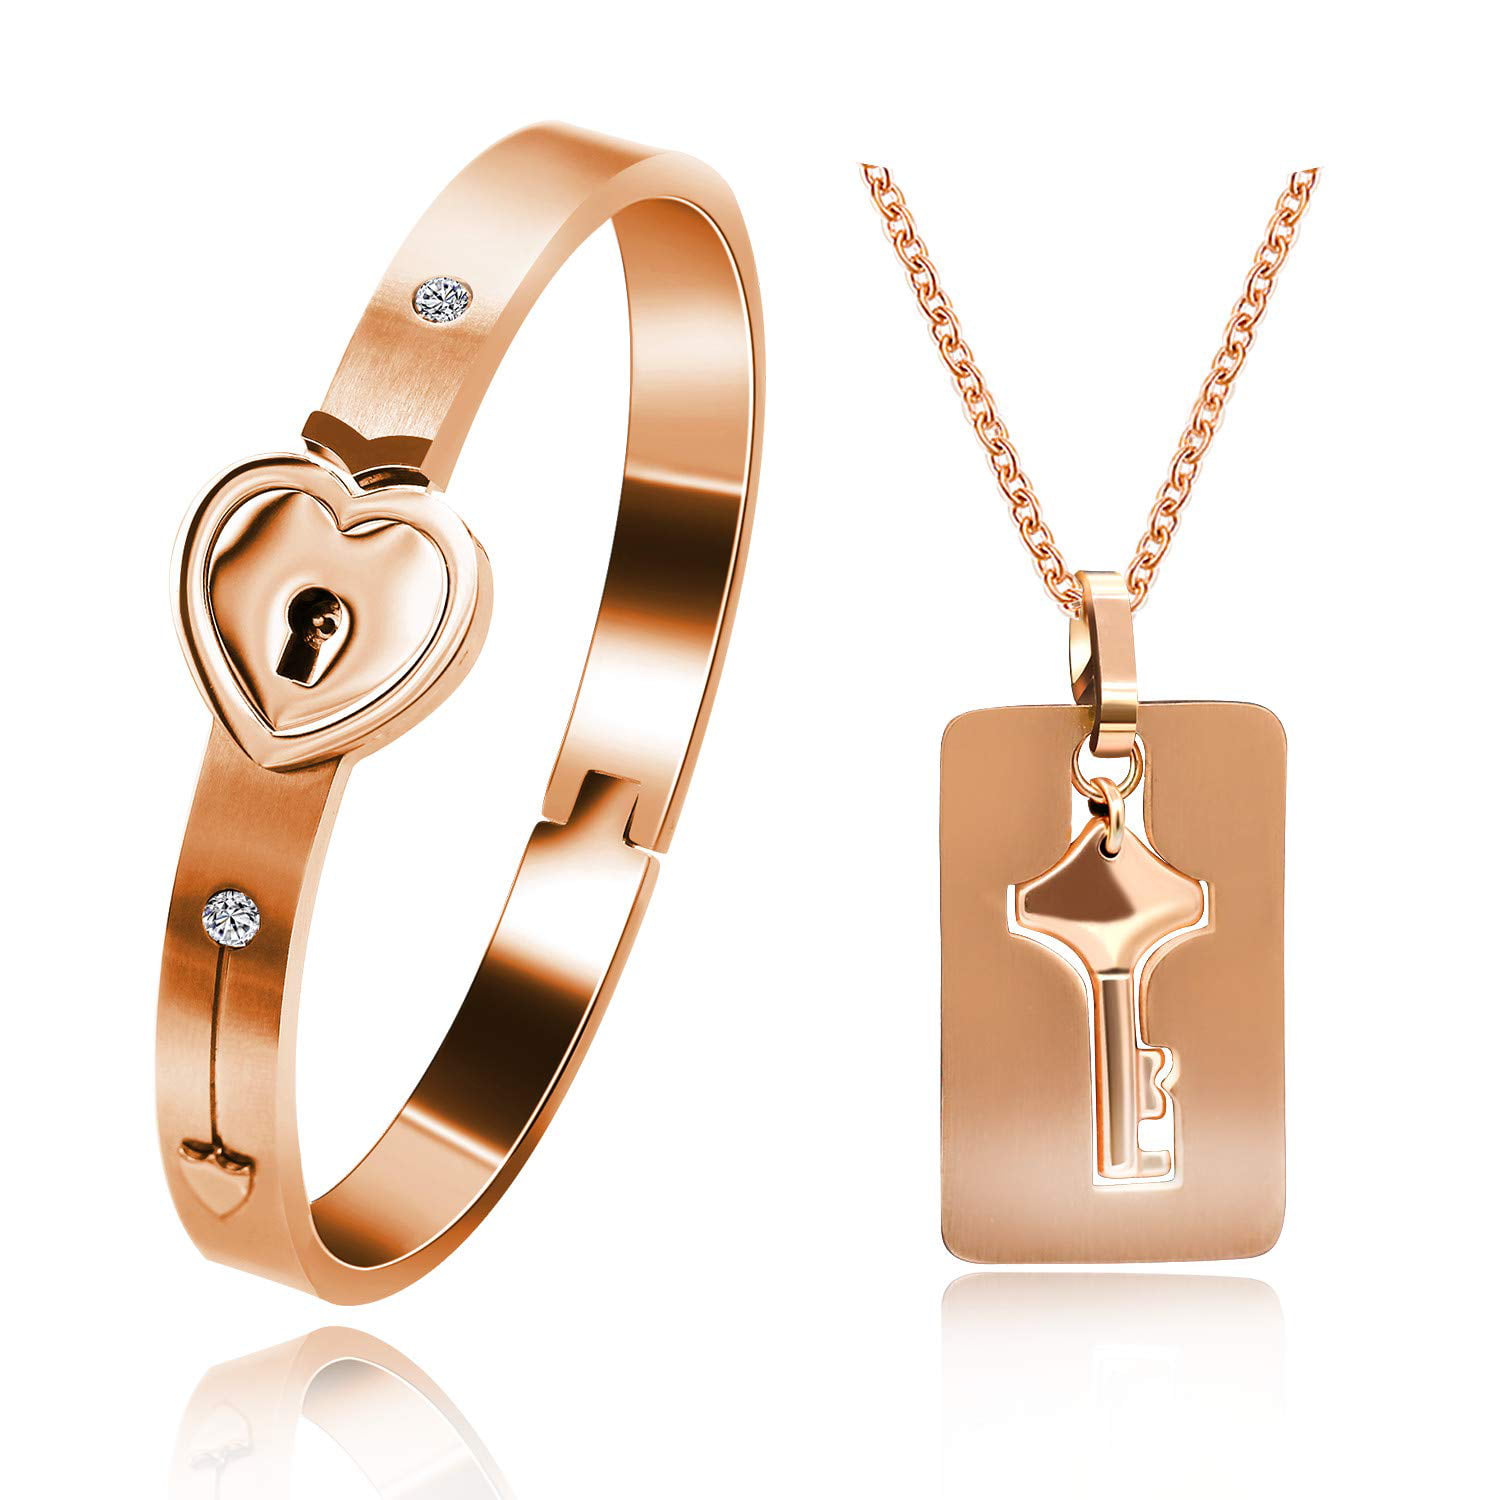 Rose Gold Plated Love Heart Lock Bangle Bracelet and Shield Key Pendant Necklace Jewellery Set for Couples Sn300, Adult Unisex, Size: One Size